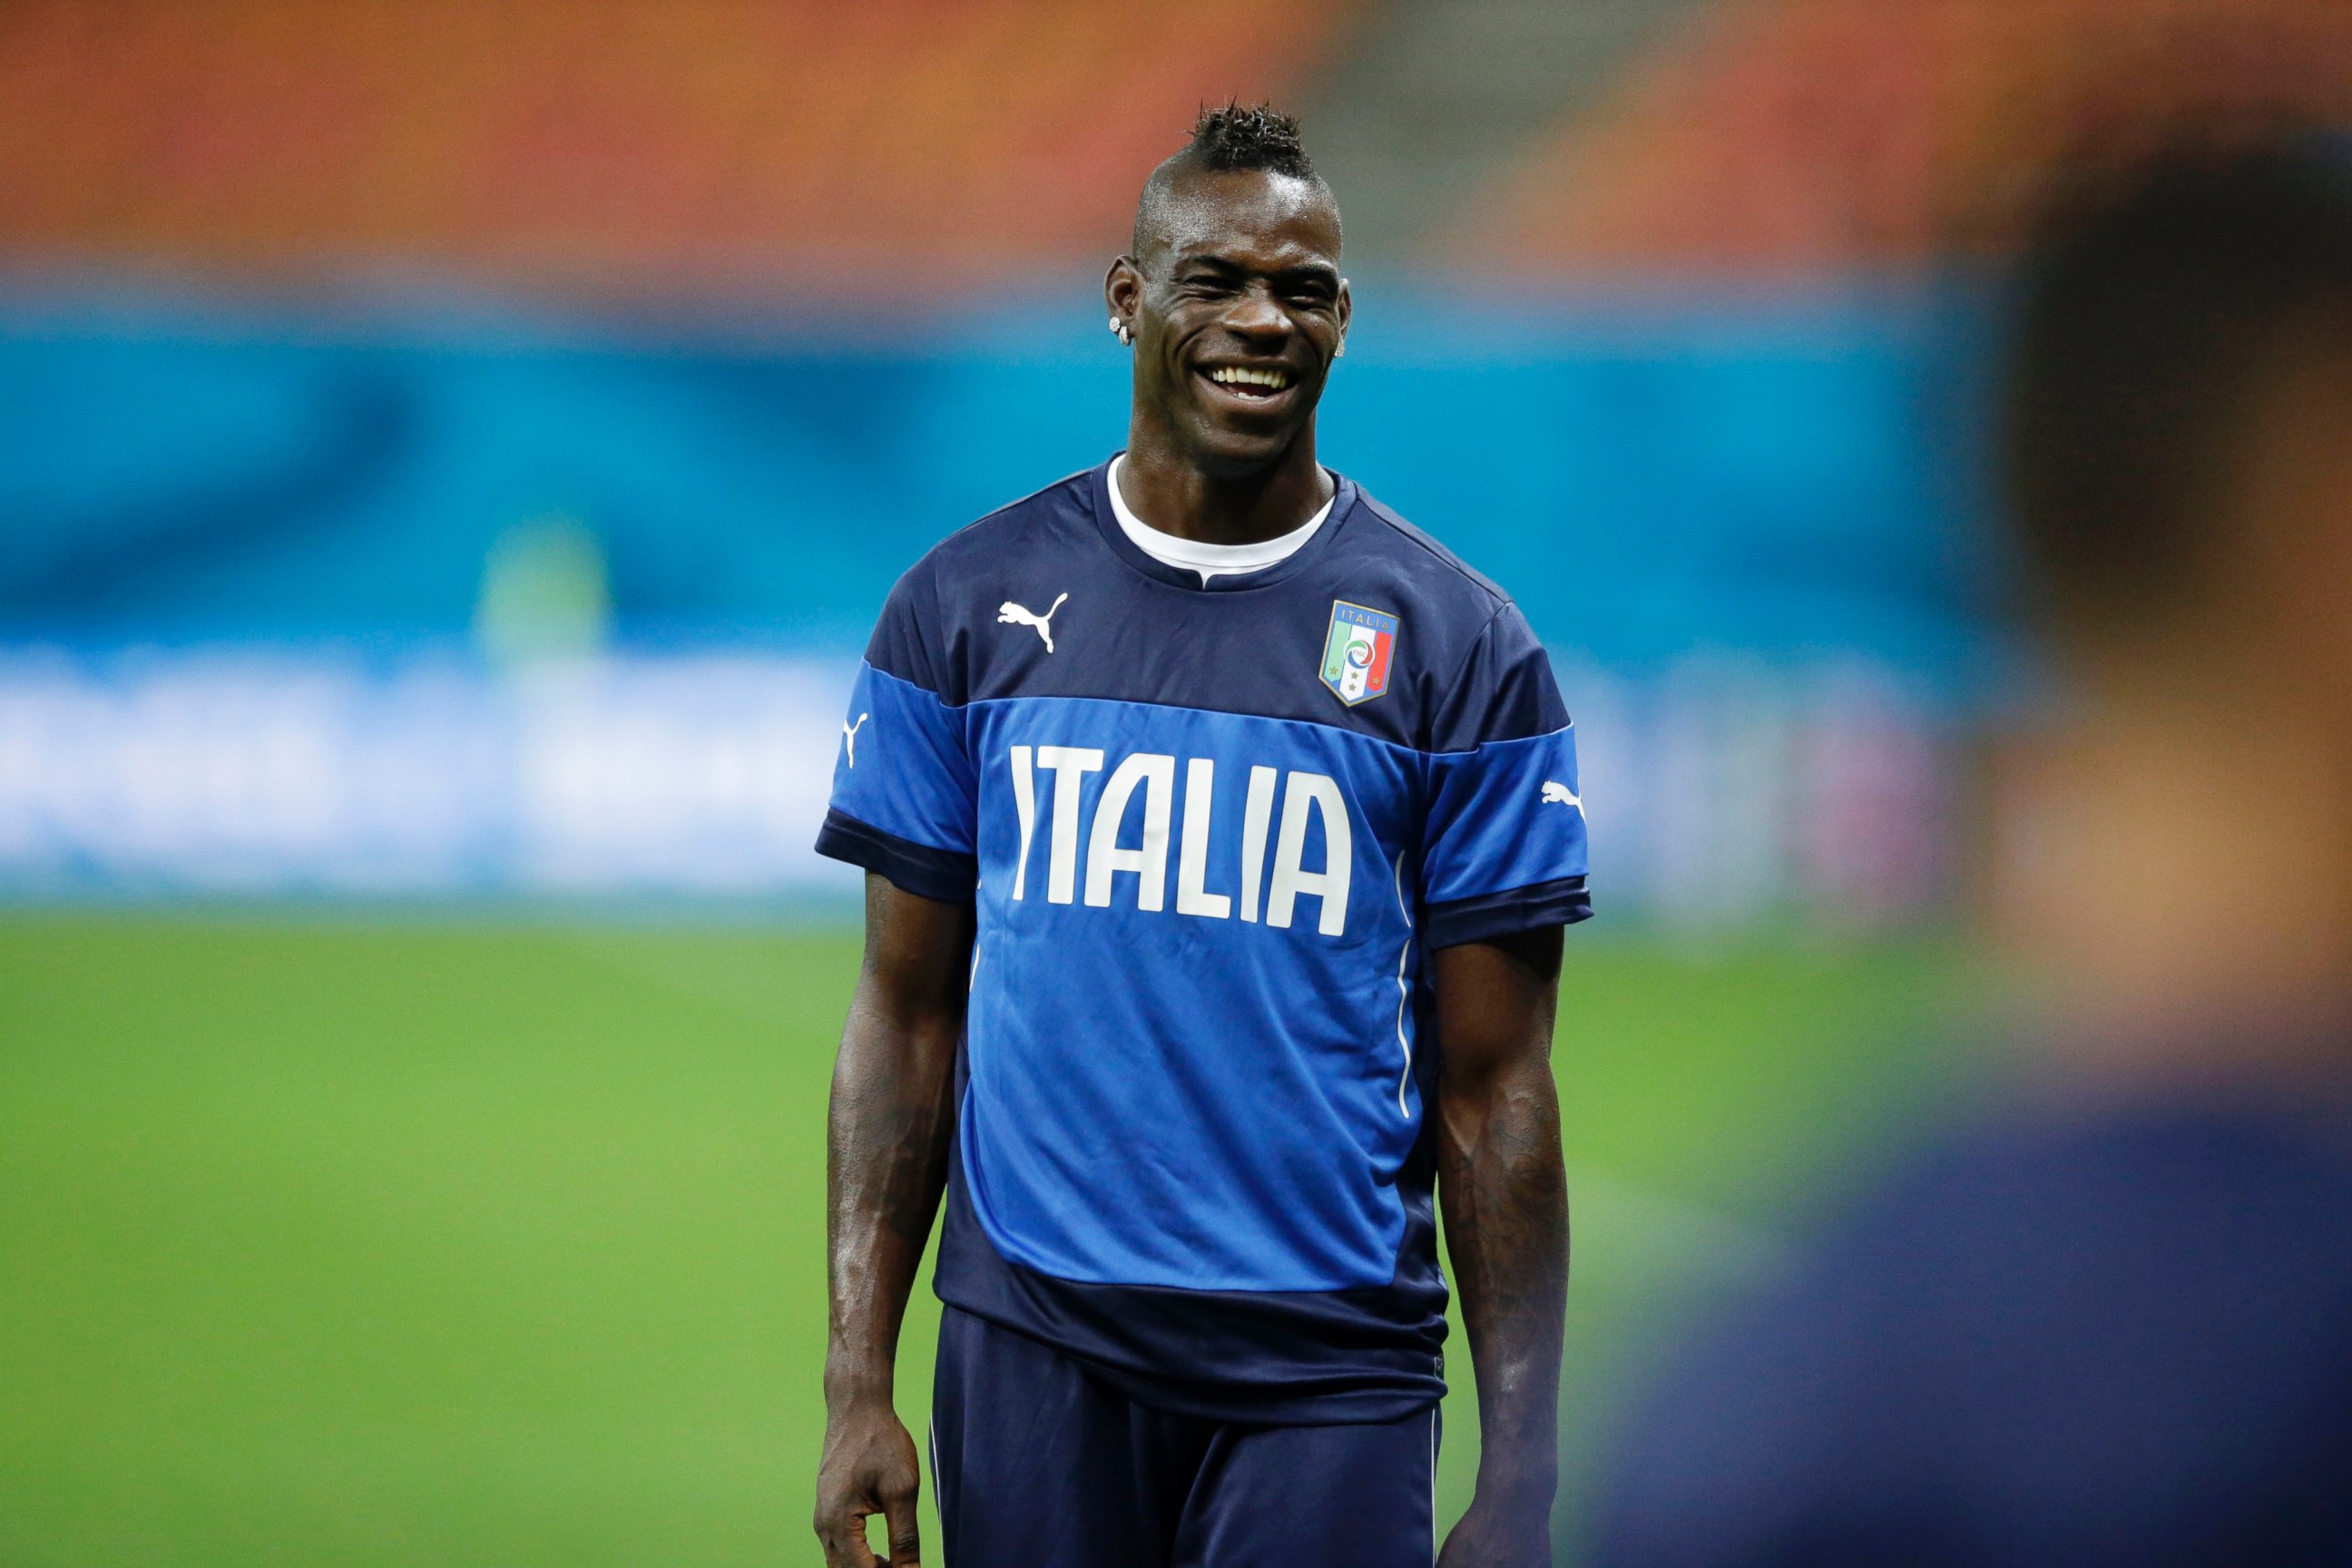 PHOTO: Italy's Mario Balotelli takes part in a training session of the Italy national soccer team at the Arena da Amazonia in Manaus, Brazil, Friday, June 13, 2014.